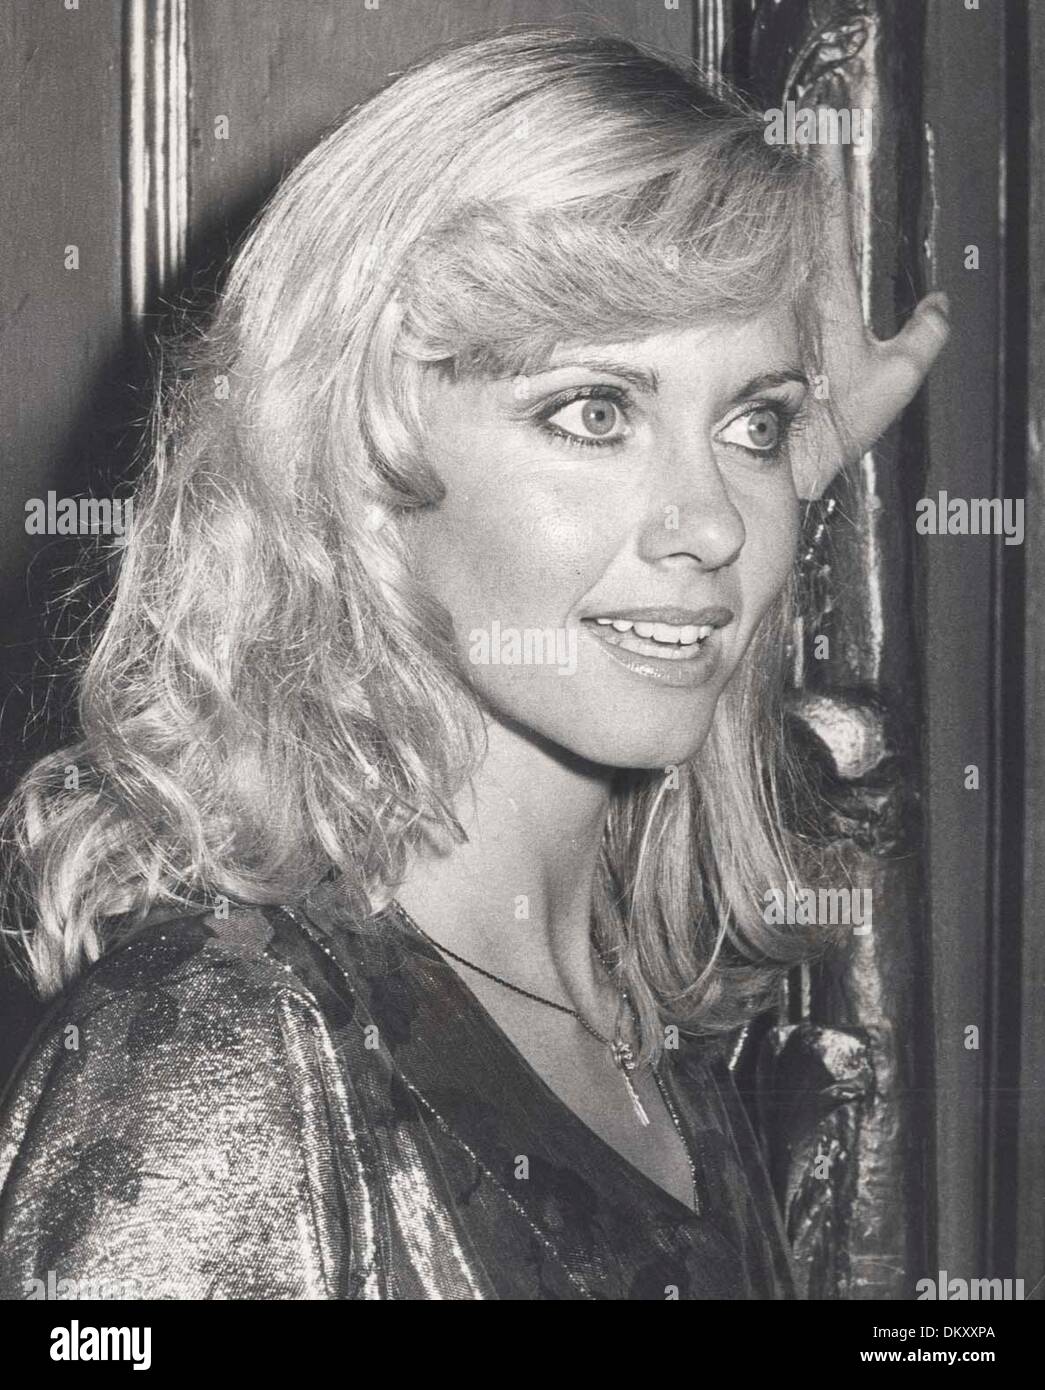 Sep 14, 1978 - London, England, United Kingdom - OLIVIA NEWTON-JOHN at the after party of the premiere of the film 'Grease' at the Lyceum Theatre. (Credit Image: © KEYSTONE Pictures/ZUMAPRESS.com) Stock Photo